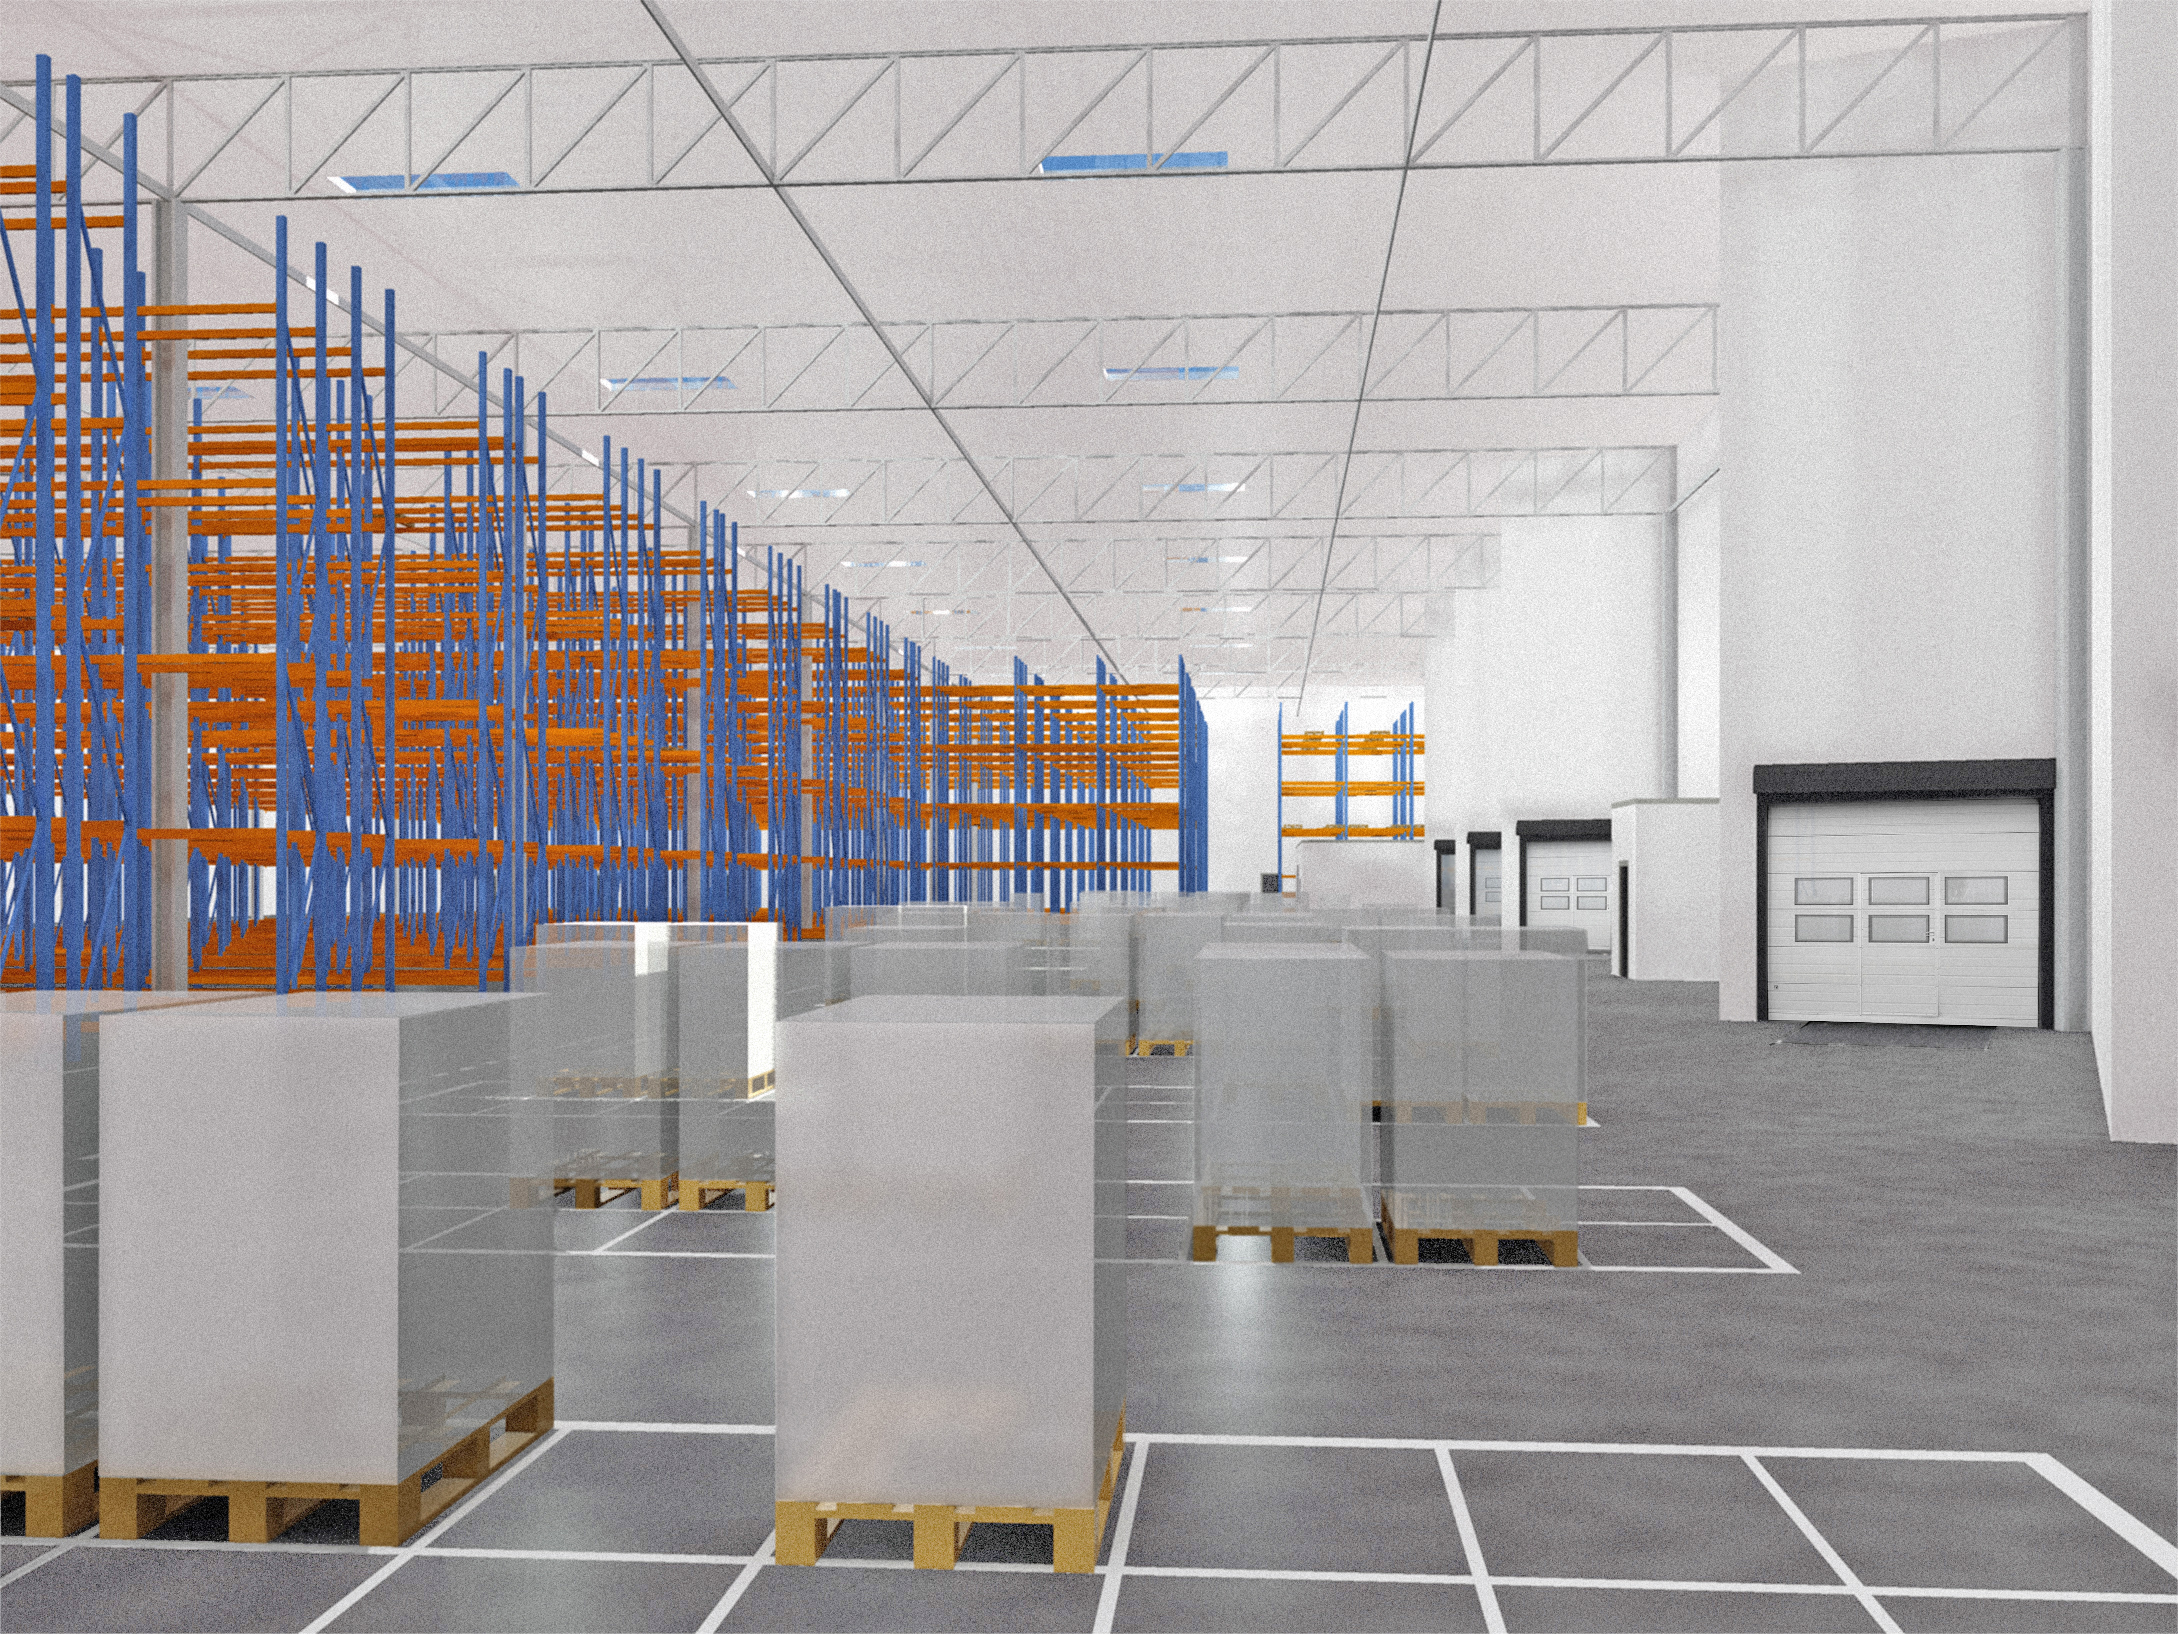 Object visualization. Computerized layout of the warehouse, with visible racks and shelves, as well as gray cuboid-shaped loads placed on wooden pallets